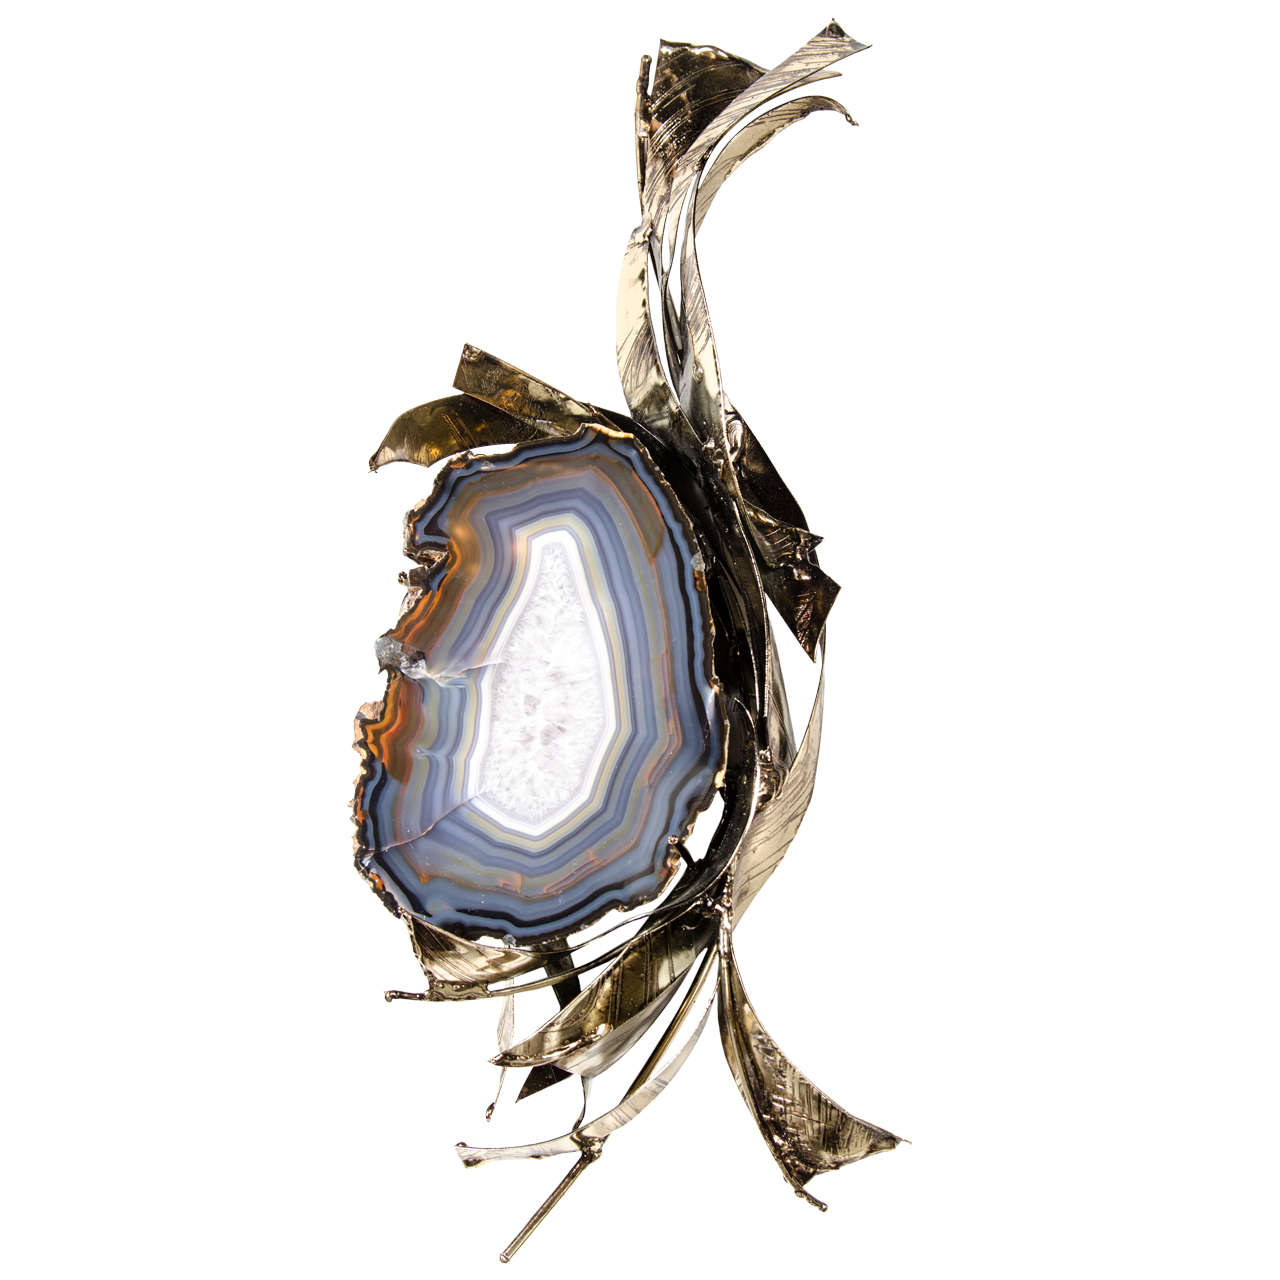 Exquisite Sliced Cerulean Blue Crystal Geode Wall Sculpture by Marc D'Haenens